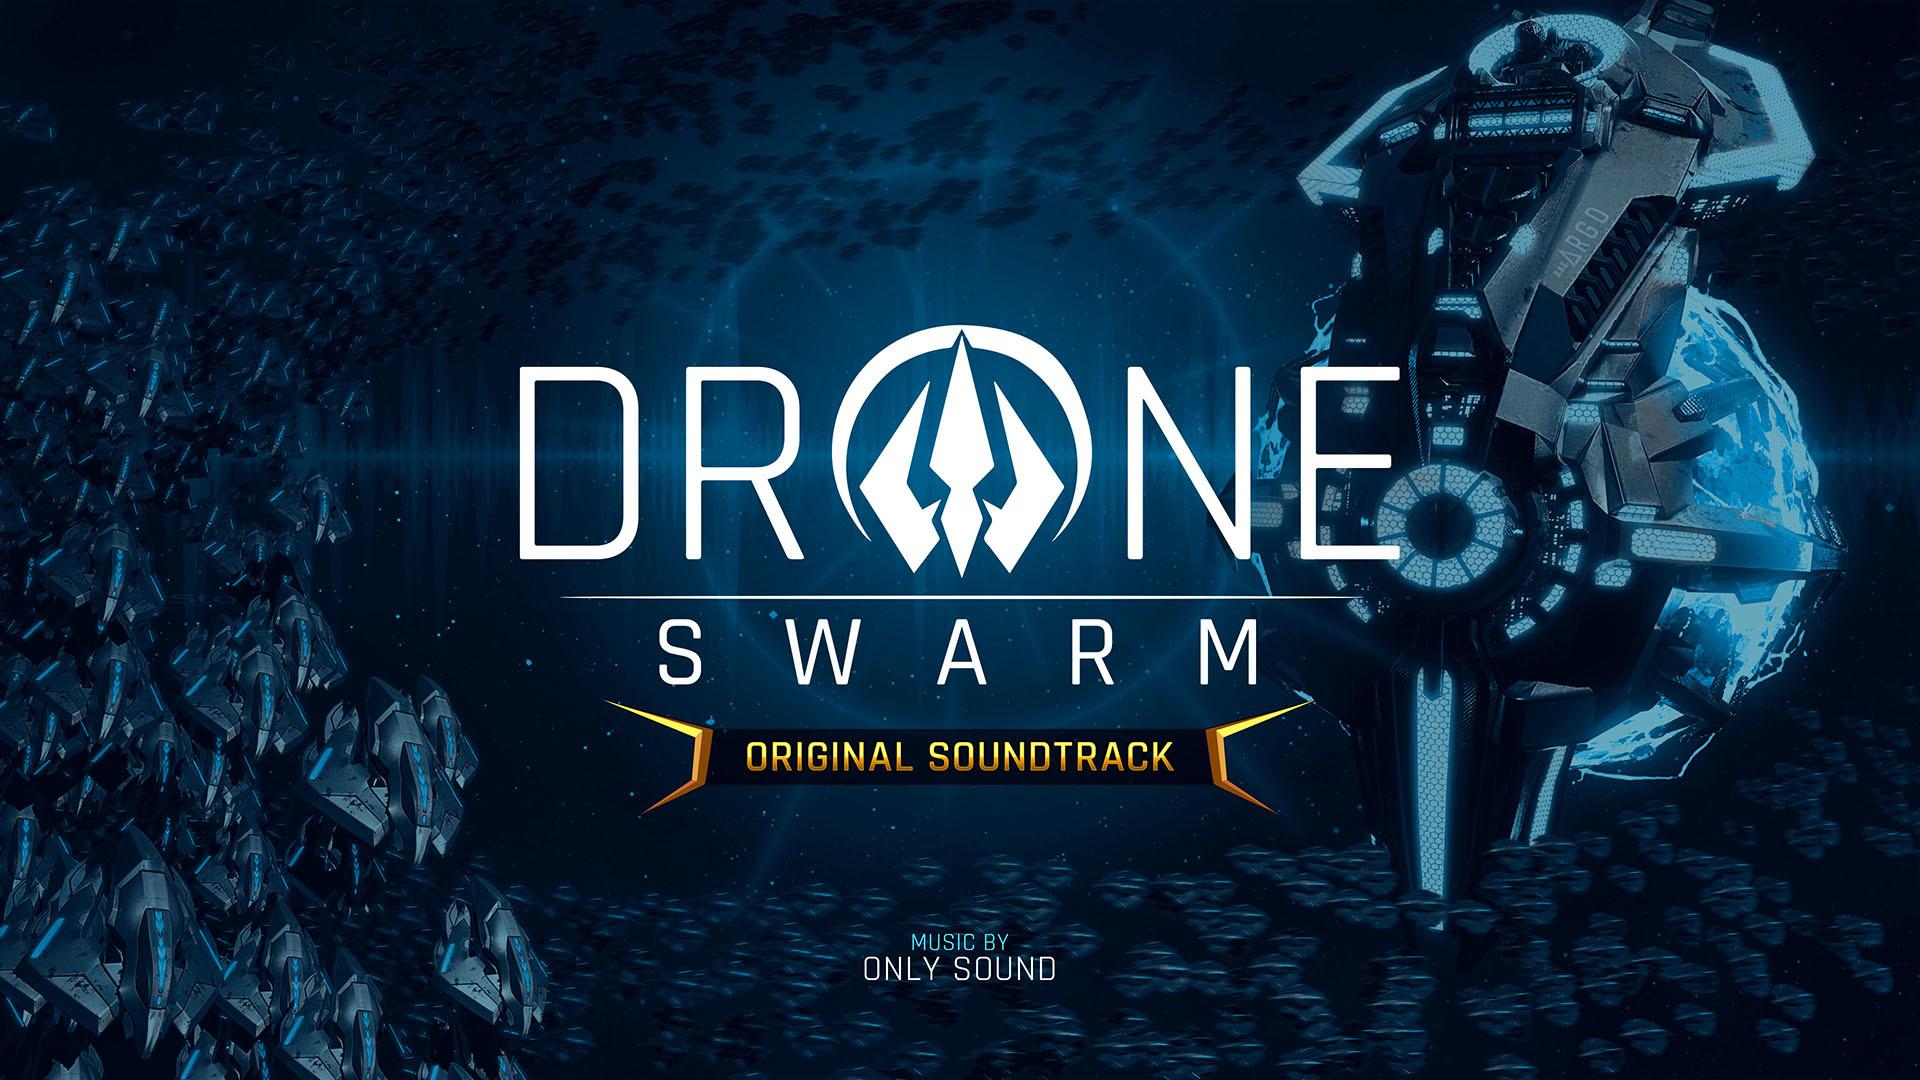 Drone Swarm - Soundtrack Featured Screenshot #1